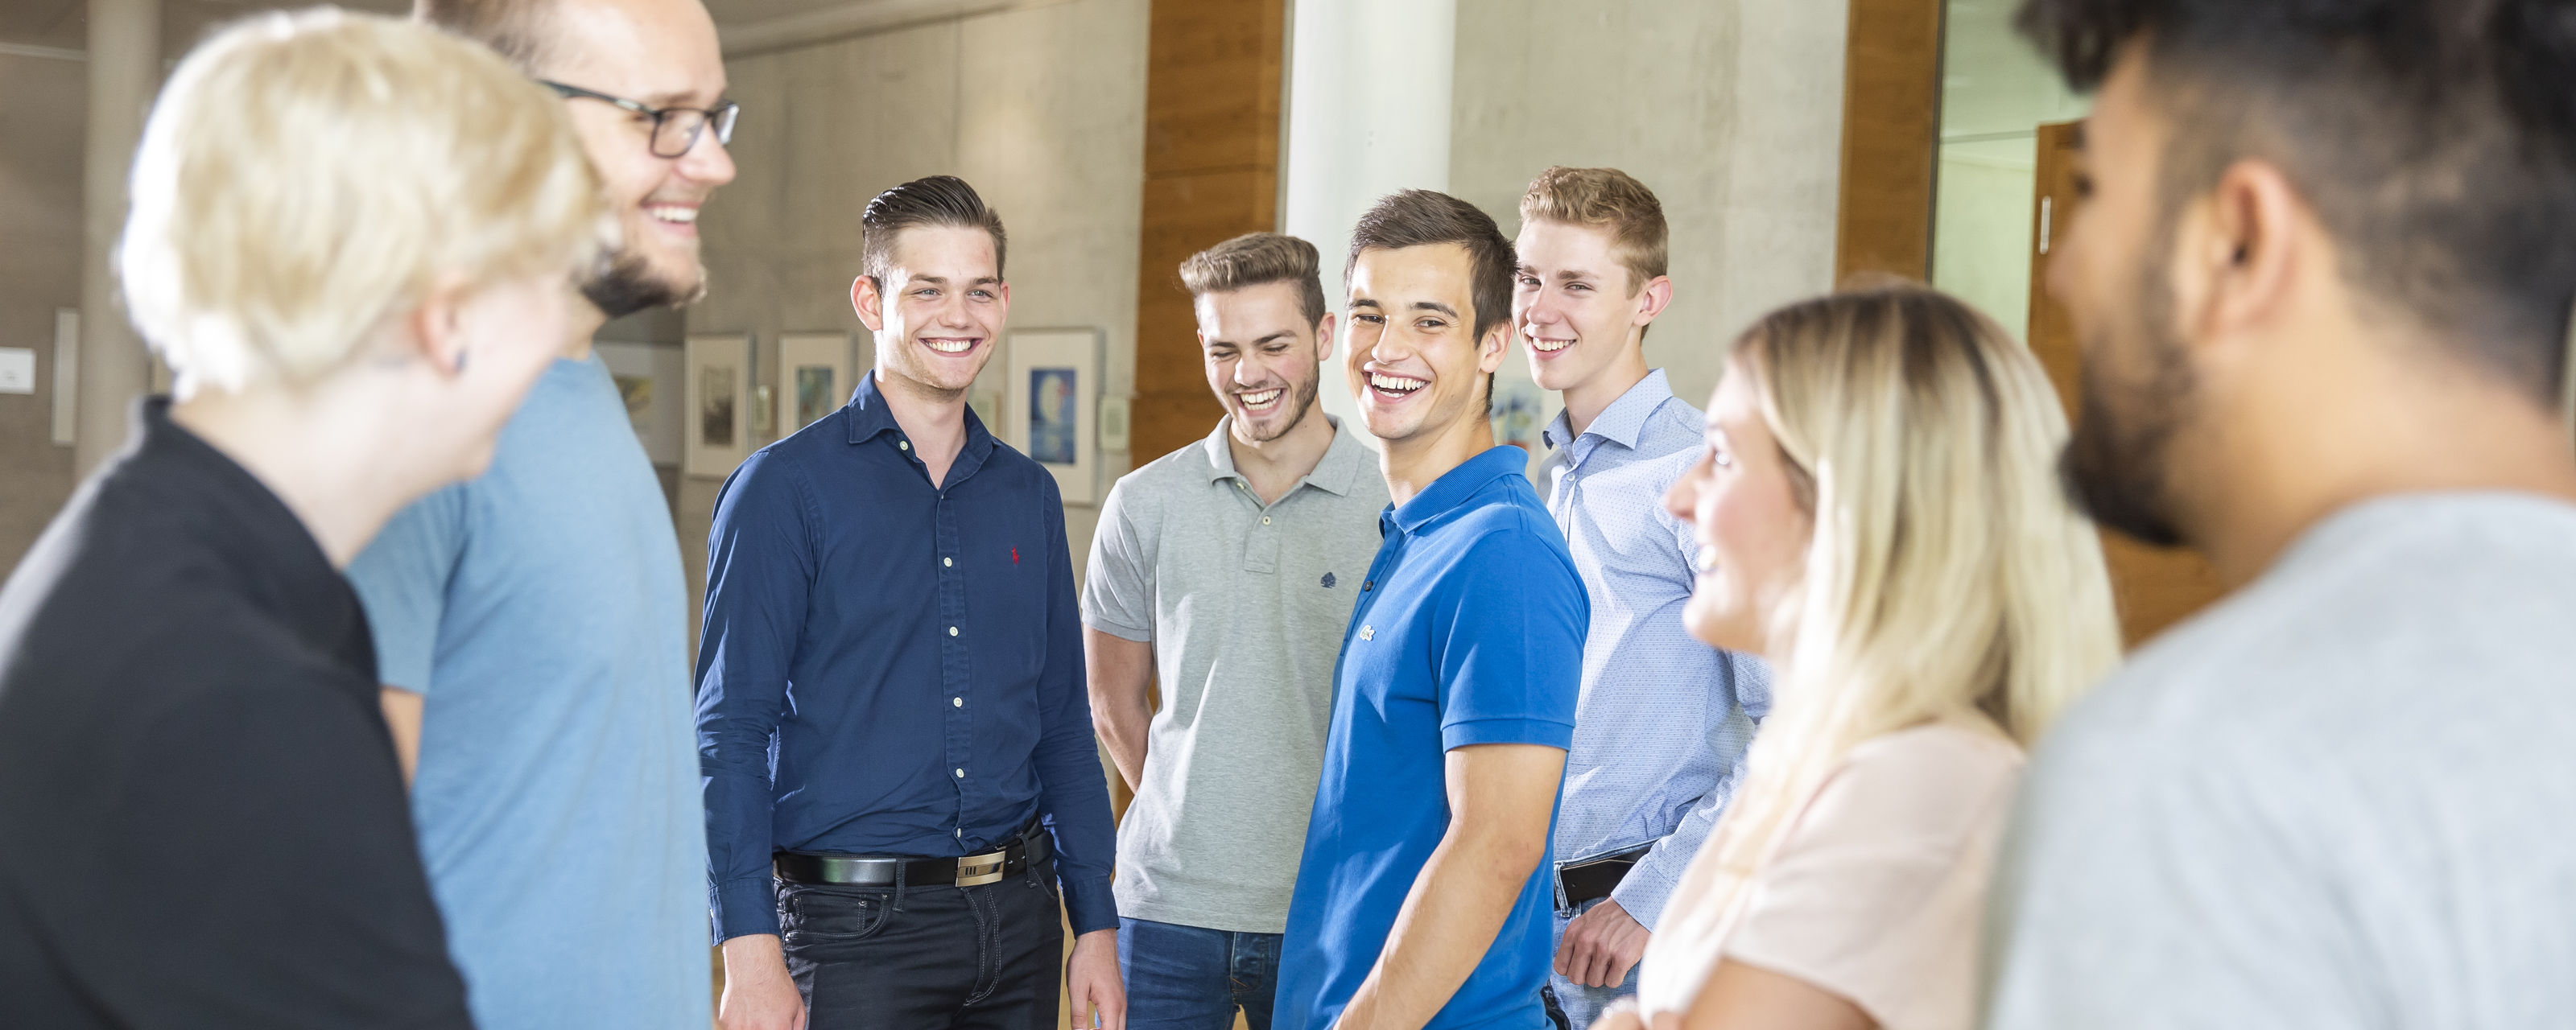 Group of Murrelektronik apprentices and students